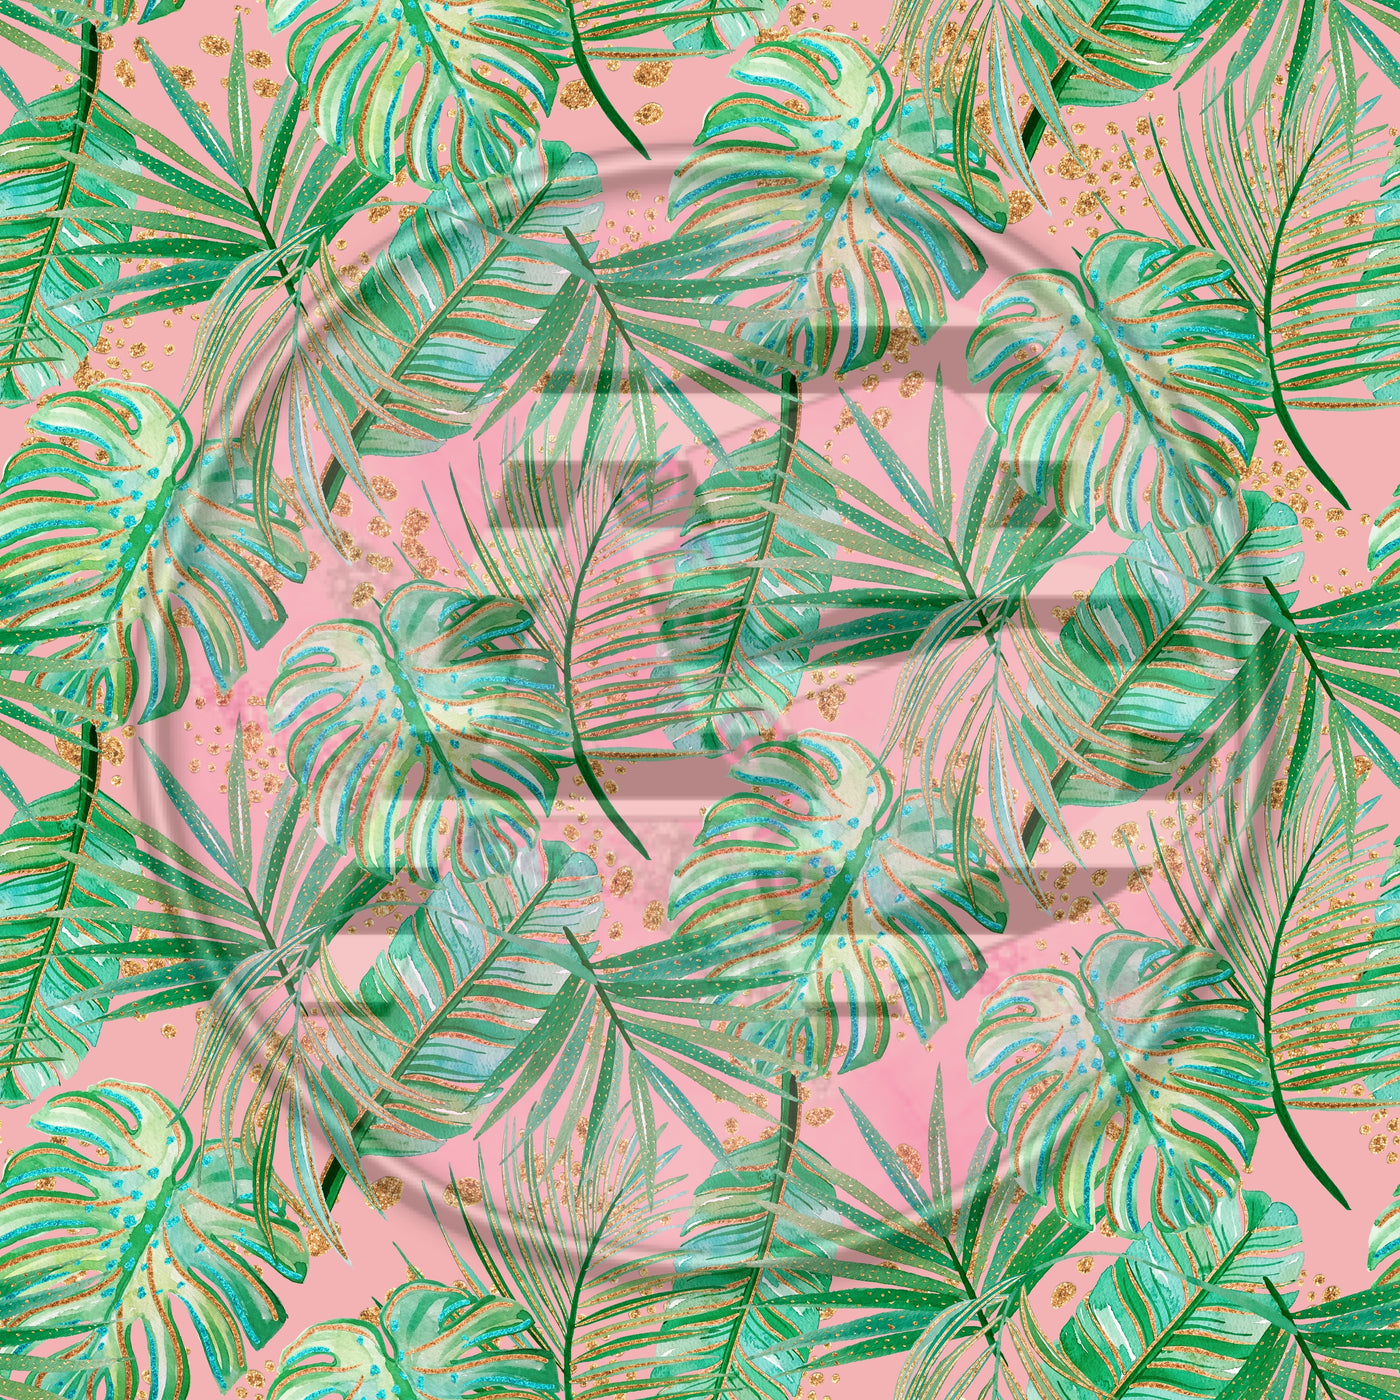 Adhesive Patterned Vinyl - Tropical 710